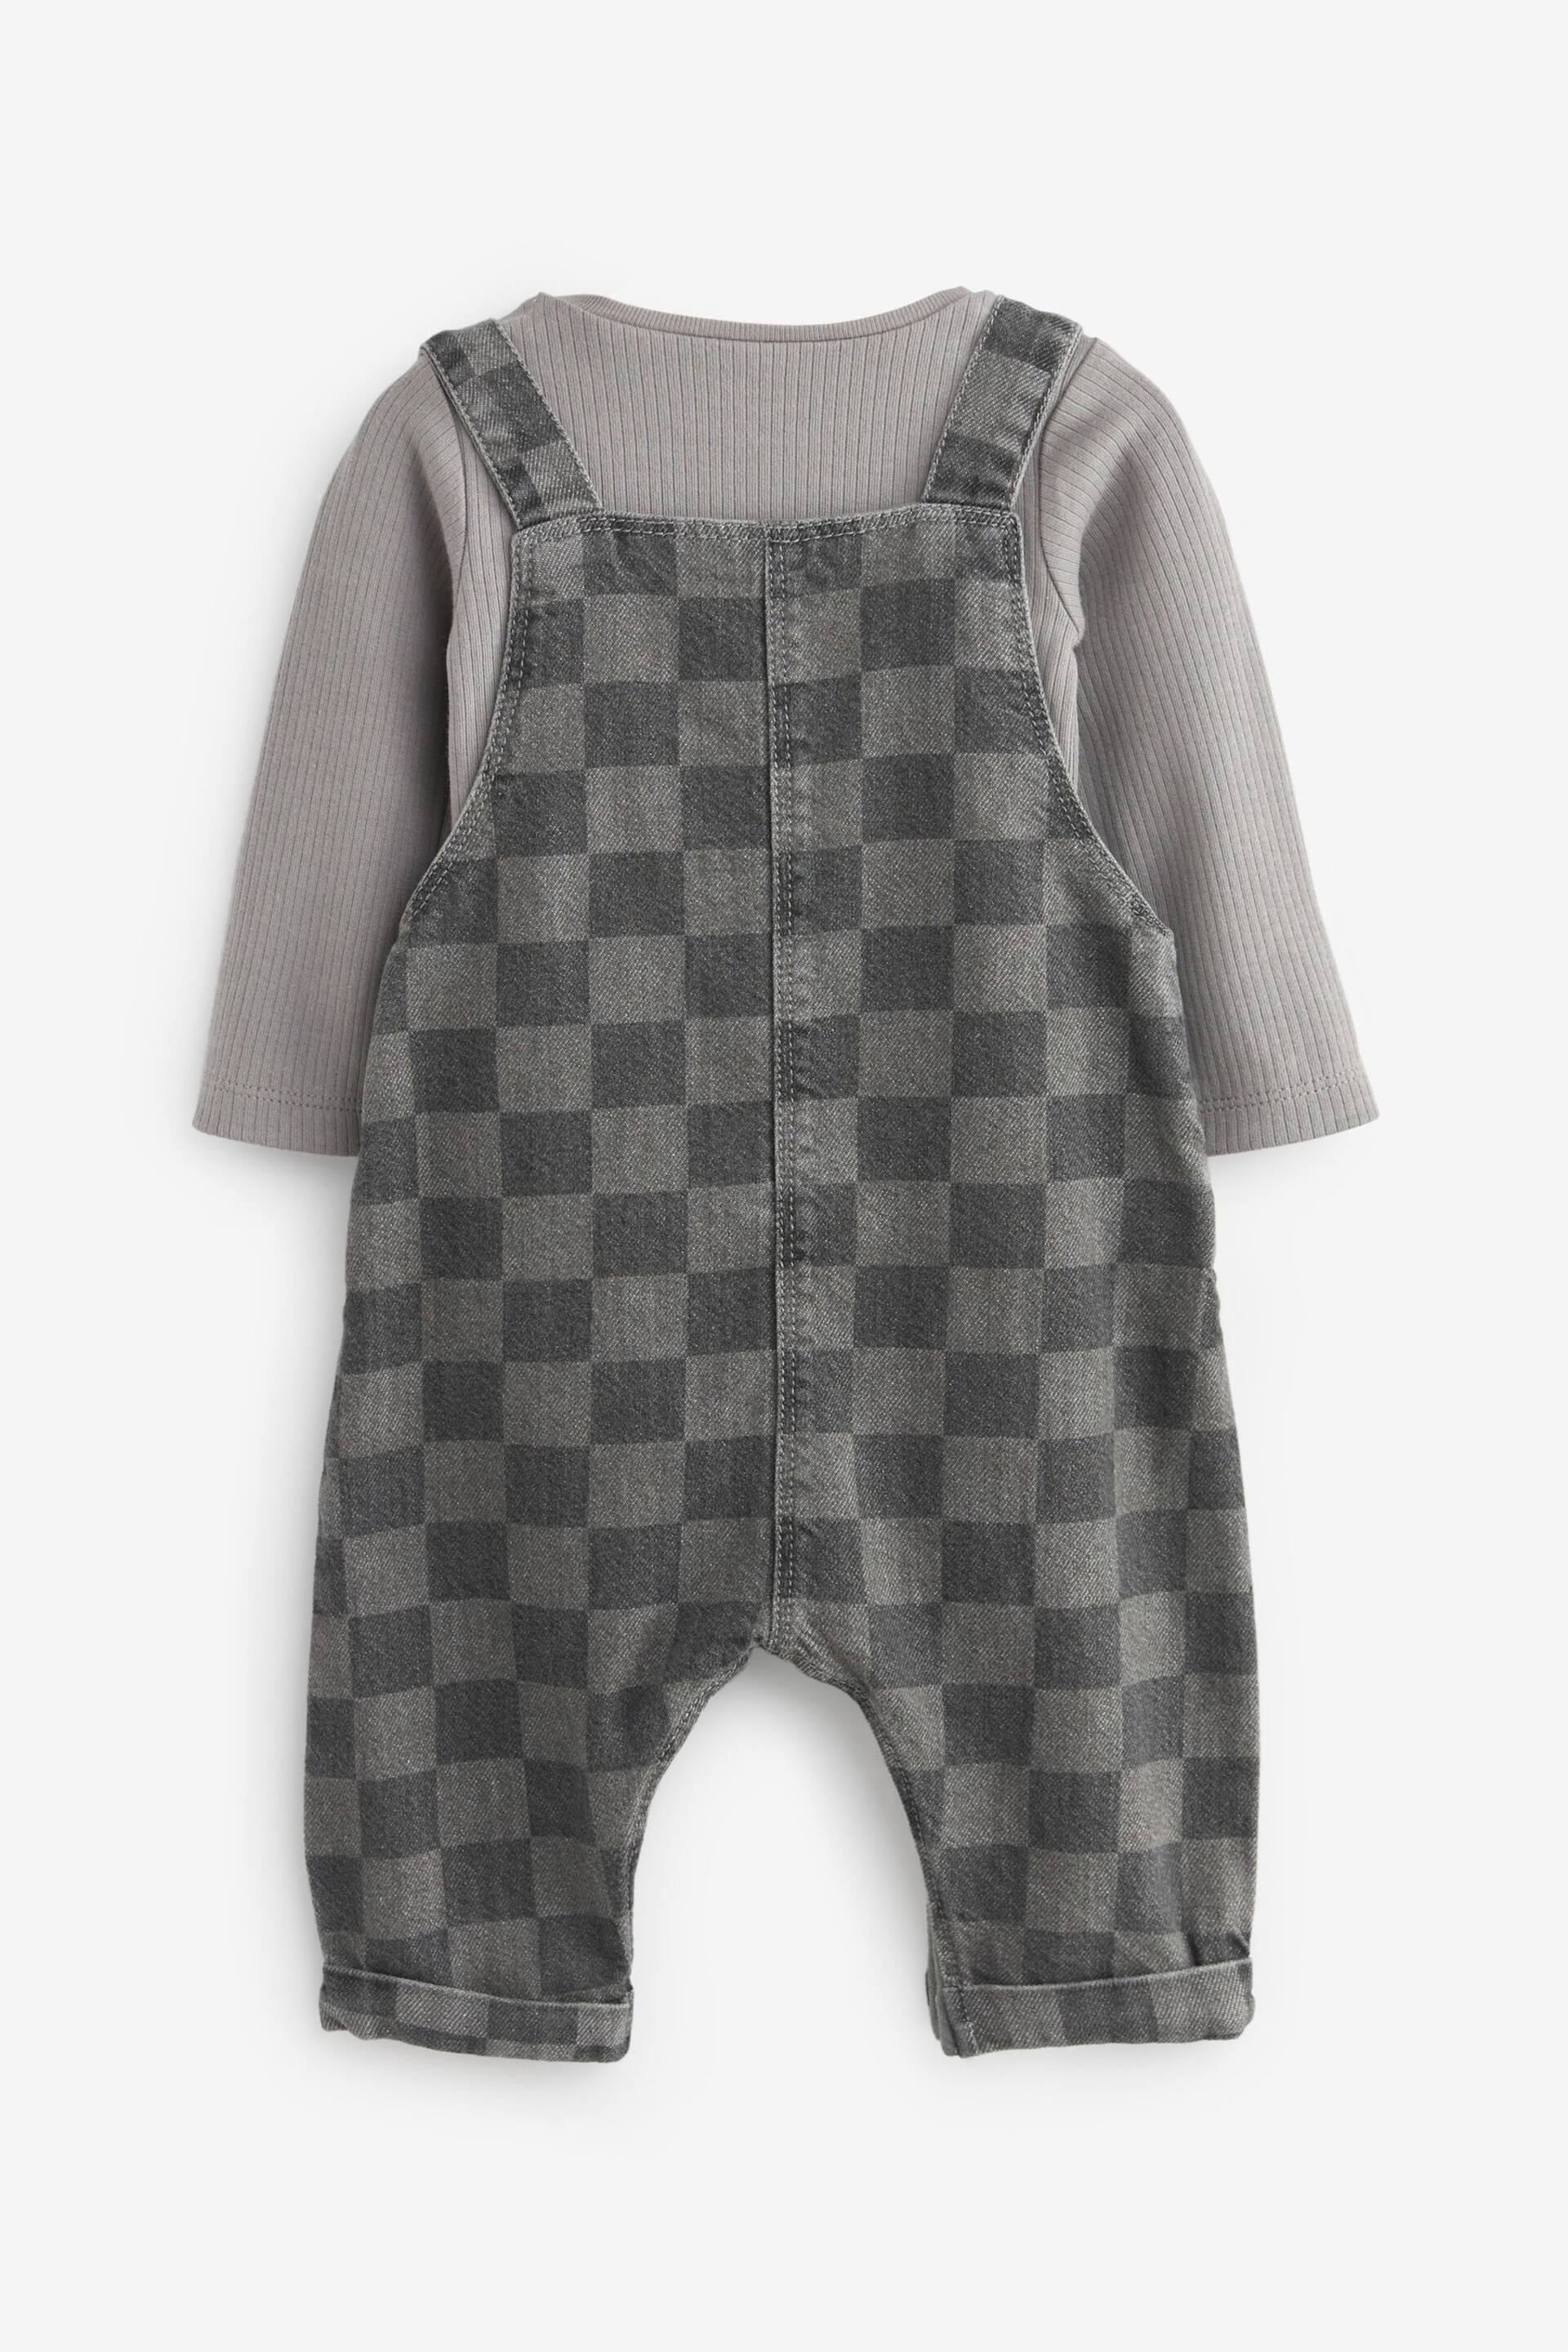 Monochrome Check Baby Denim Dungarees And Bodysuit Set (0mths-2yrs) - Image 5 of 7